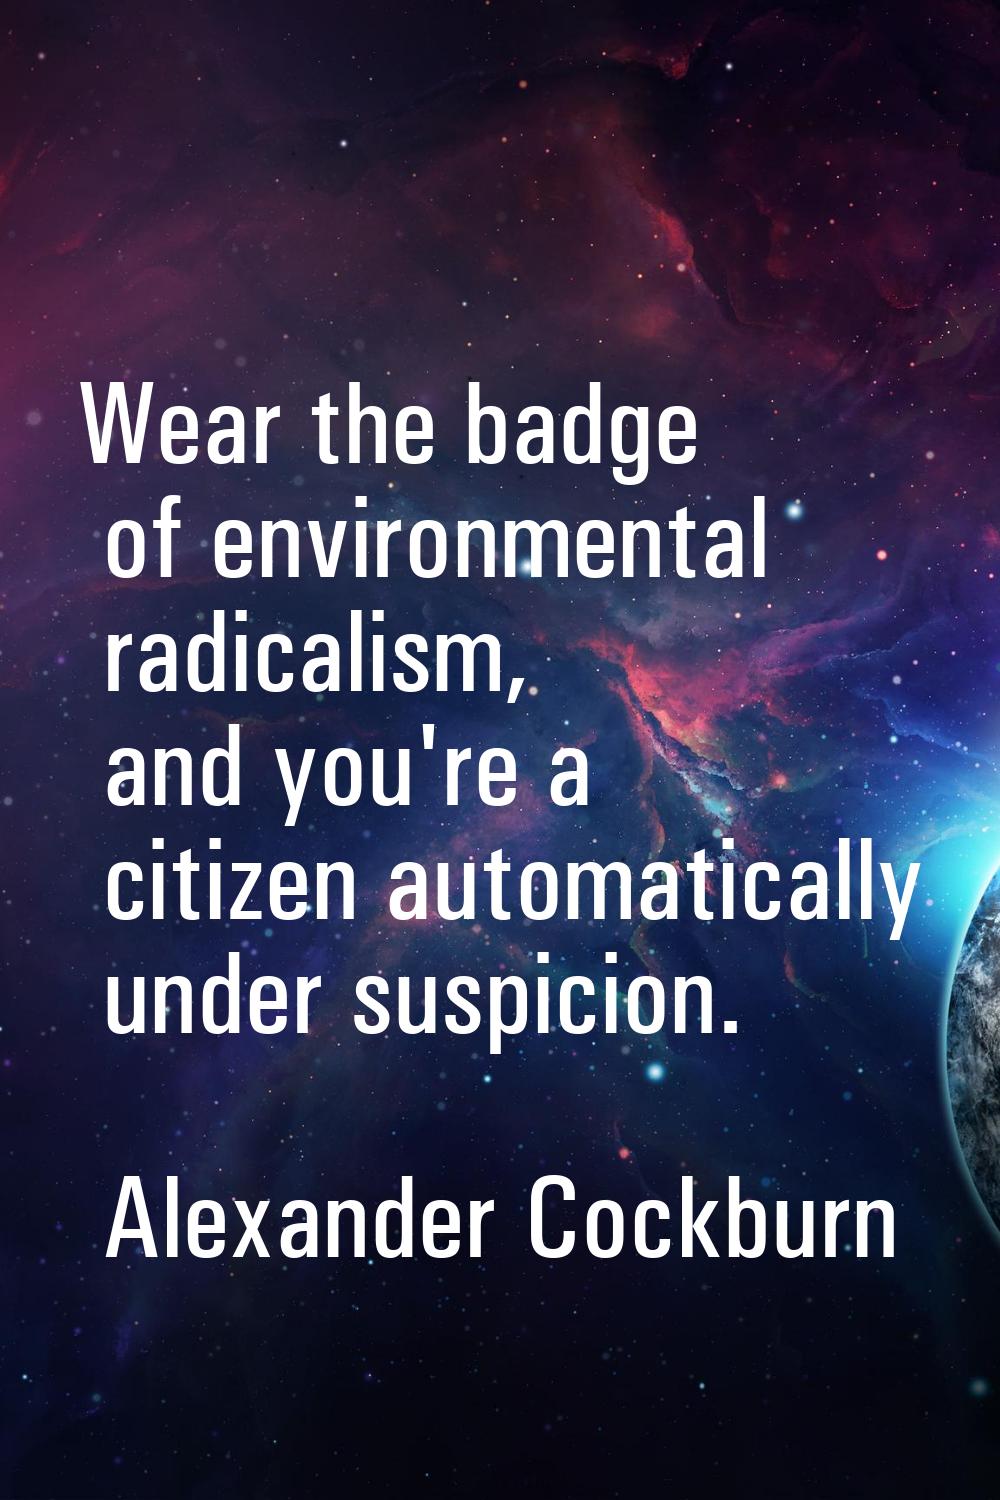 Wear the badge of environmental radicalism, and you're a citizen automatically under suspicion.